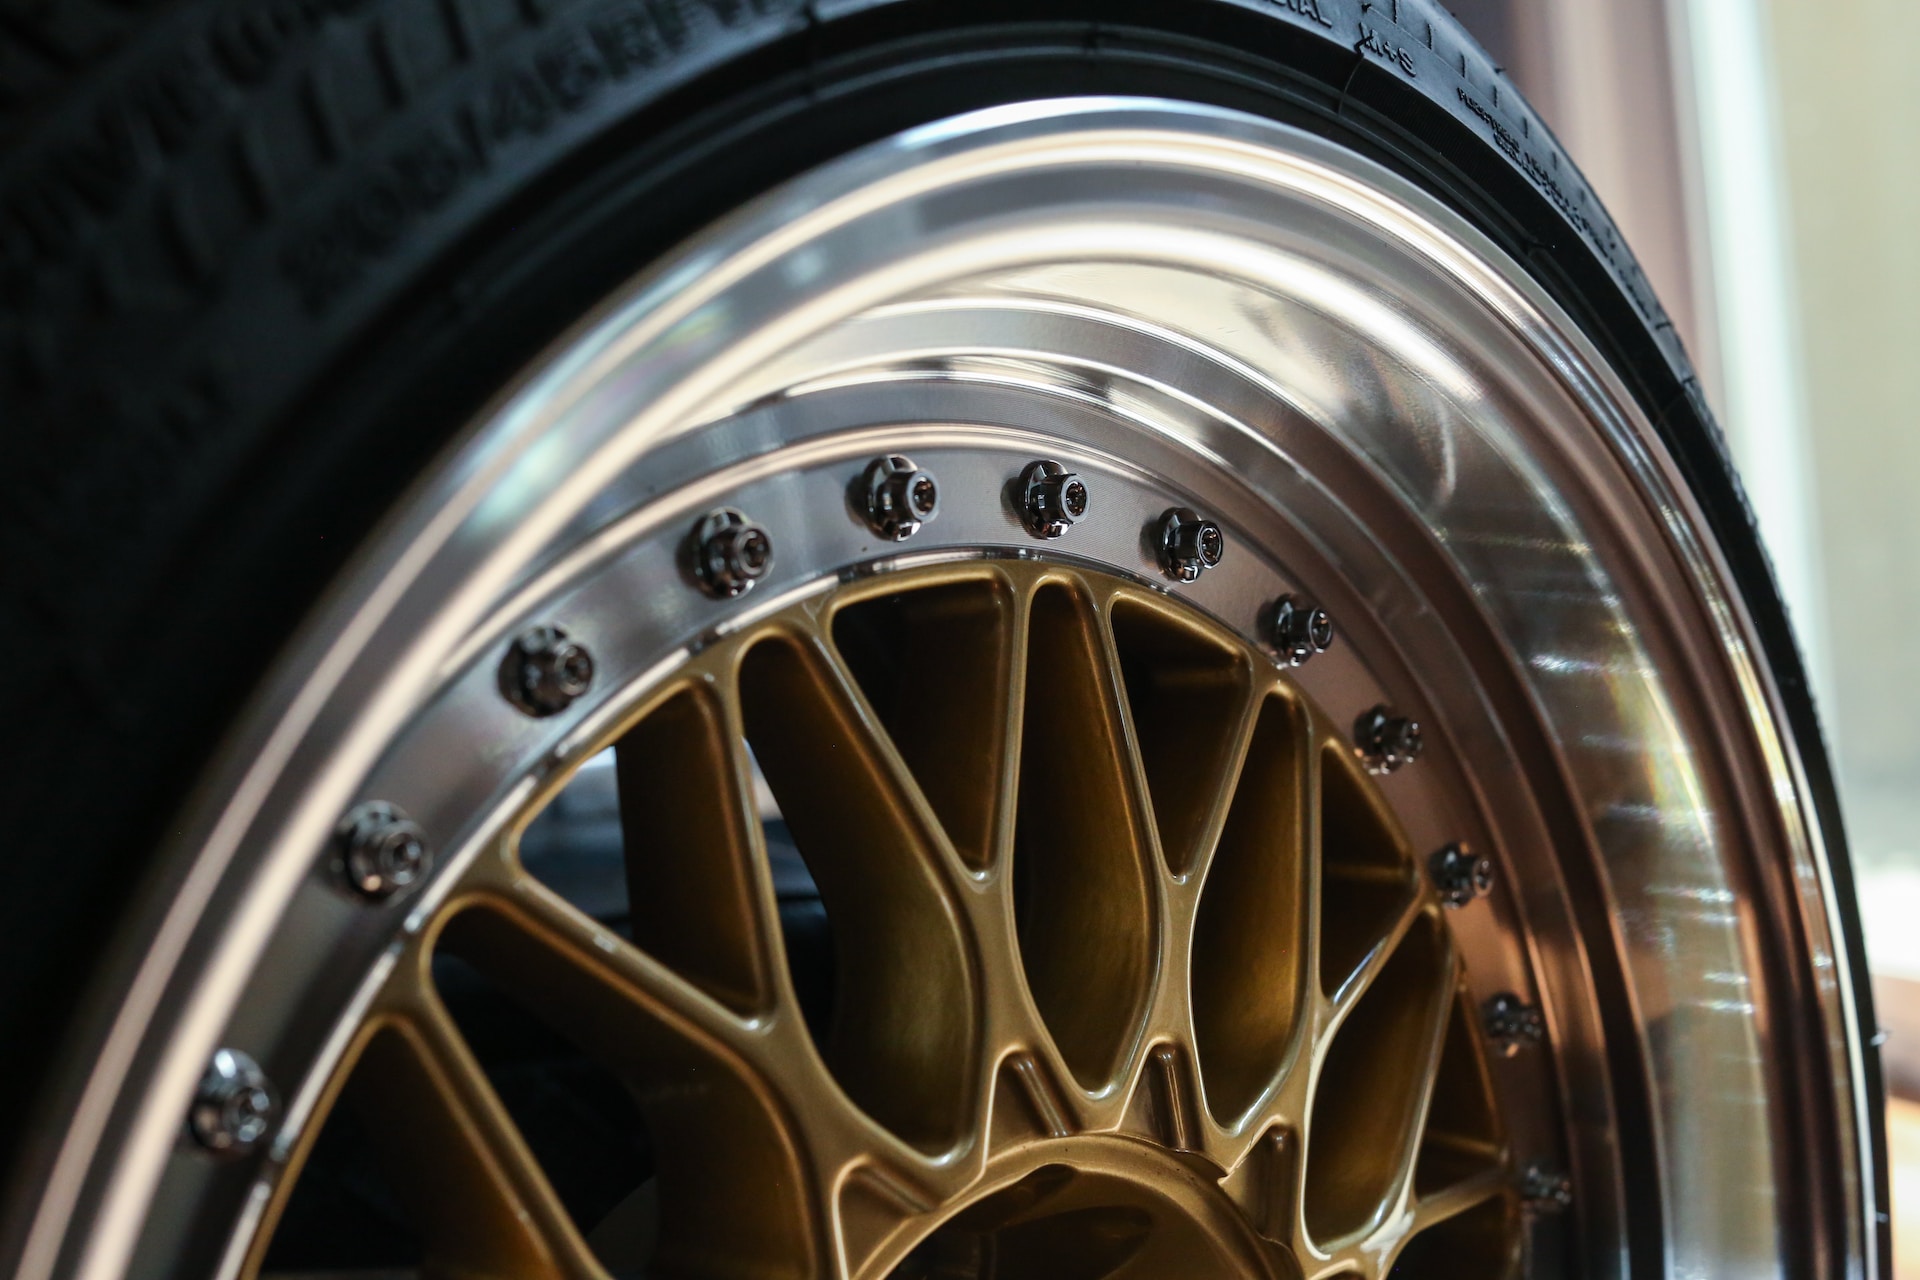 Misaligned Wheels? Look Out for These Warning Signs